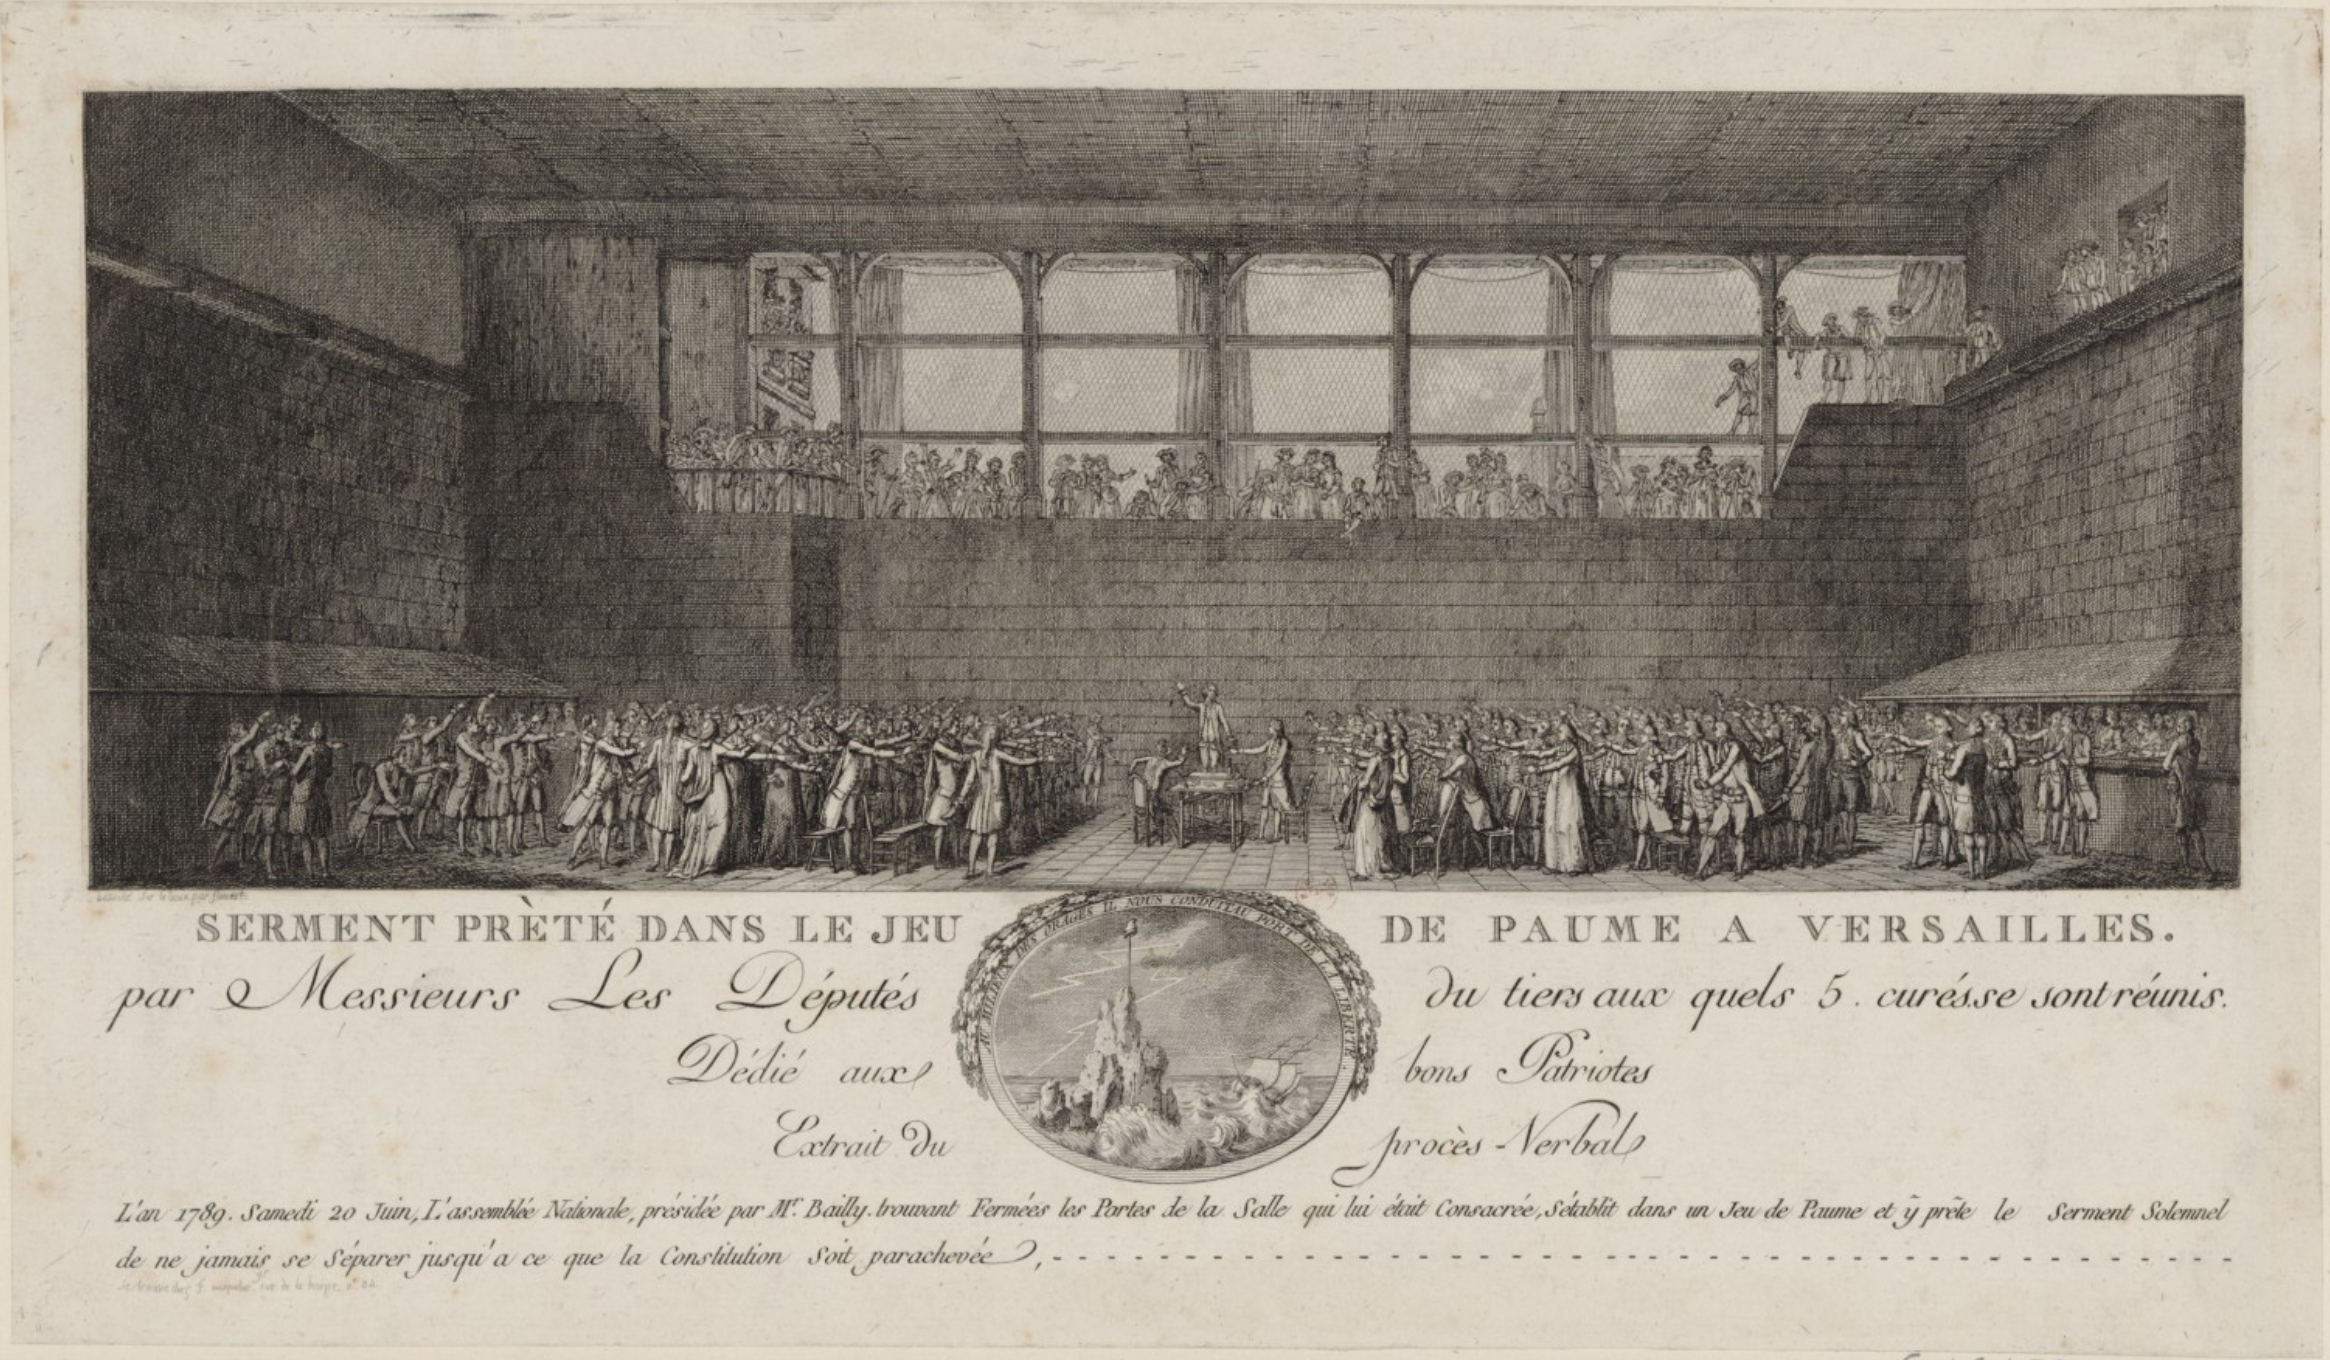 Engraving of the Tennis Court Oath. One person stands on a chair to administer the oath, while the crowd listens.